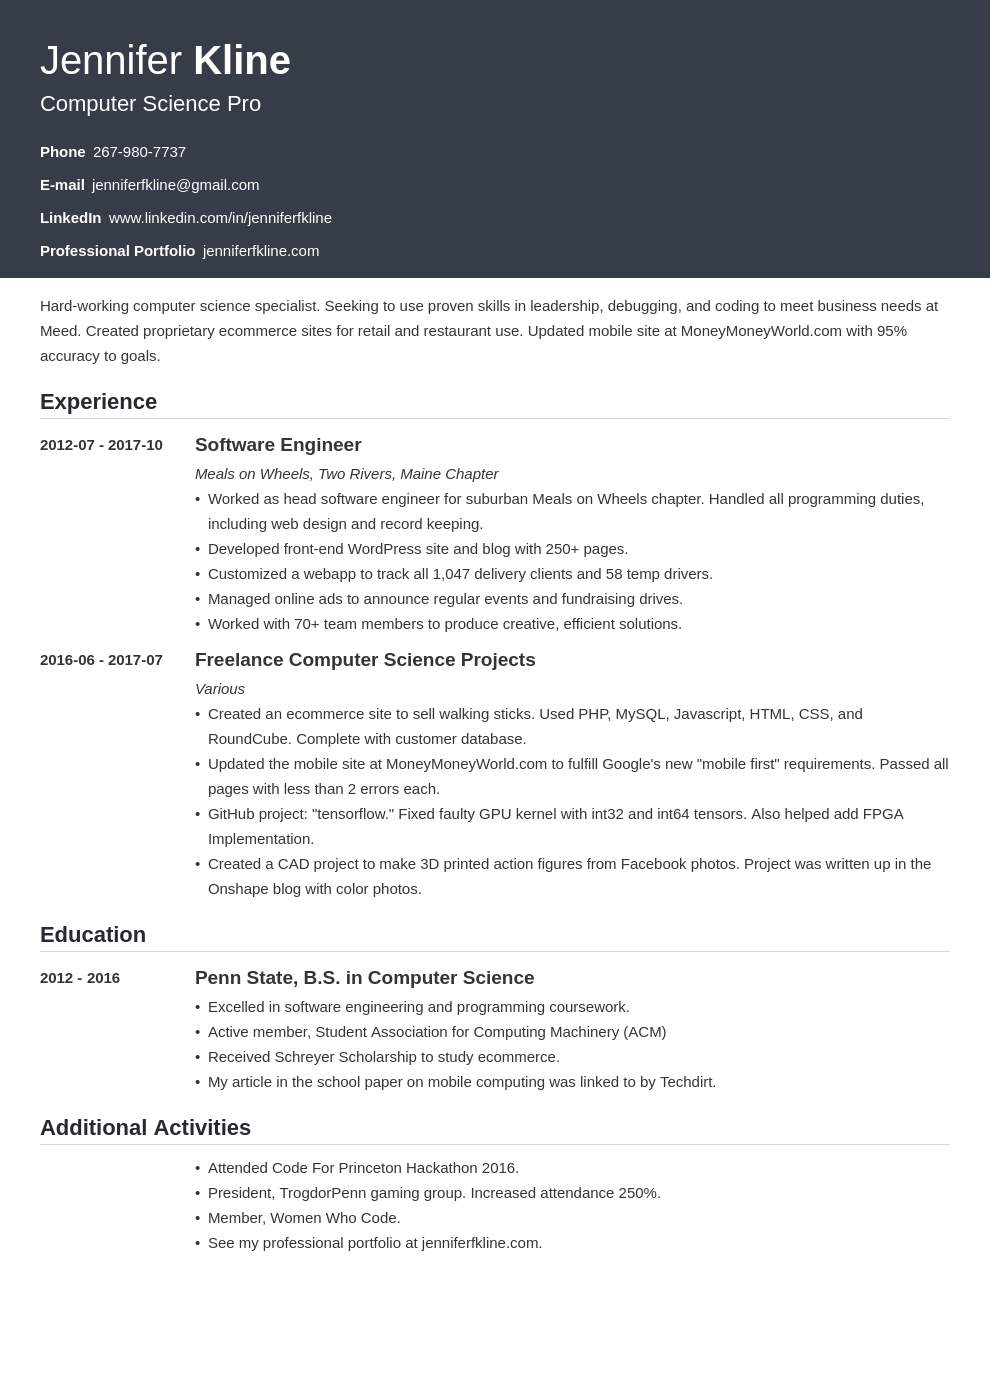 How to List Volunteer Work Experience on a Resume: Example Inside Community Service Template Word